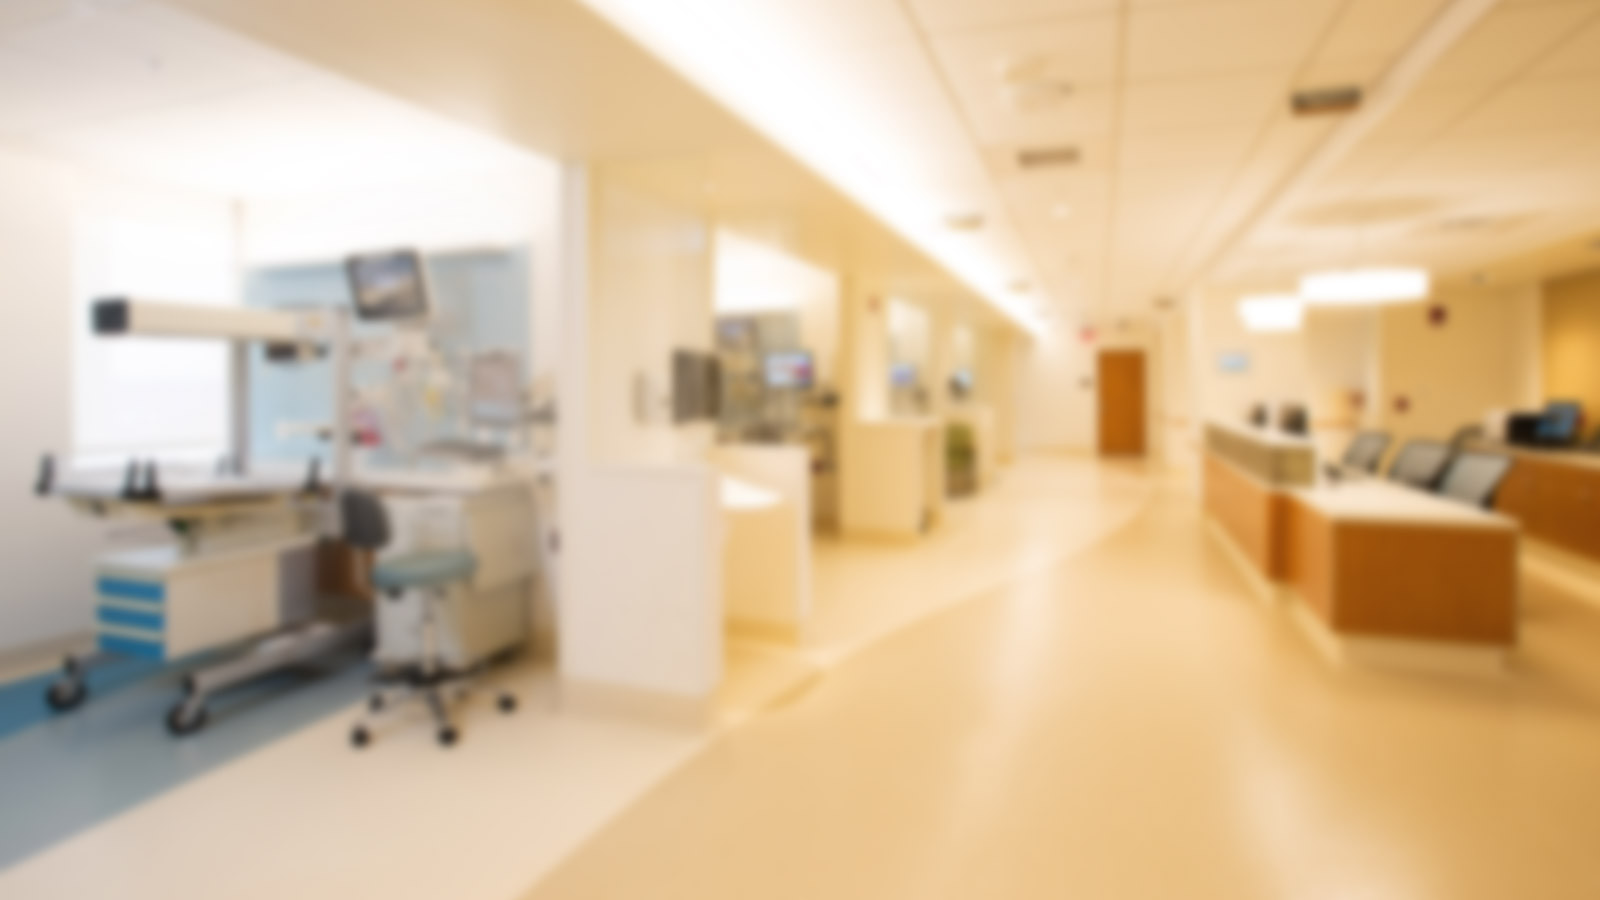 manny hardwood floors bridgeport ct of bridgeport hospital yale new haven health with regard to the new allison family neonatal intensive care unit at yale new haven childrens hospitals bridgeport campus offers enhanced family centered care and